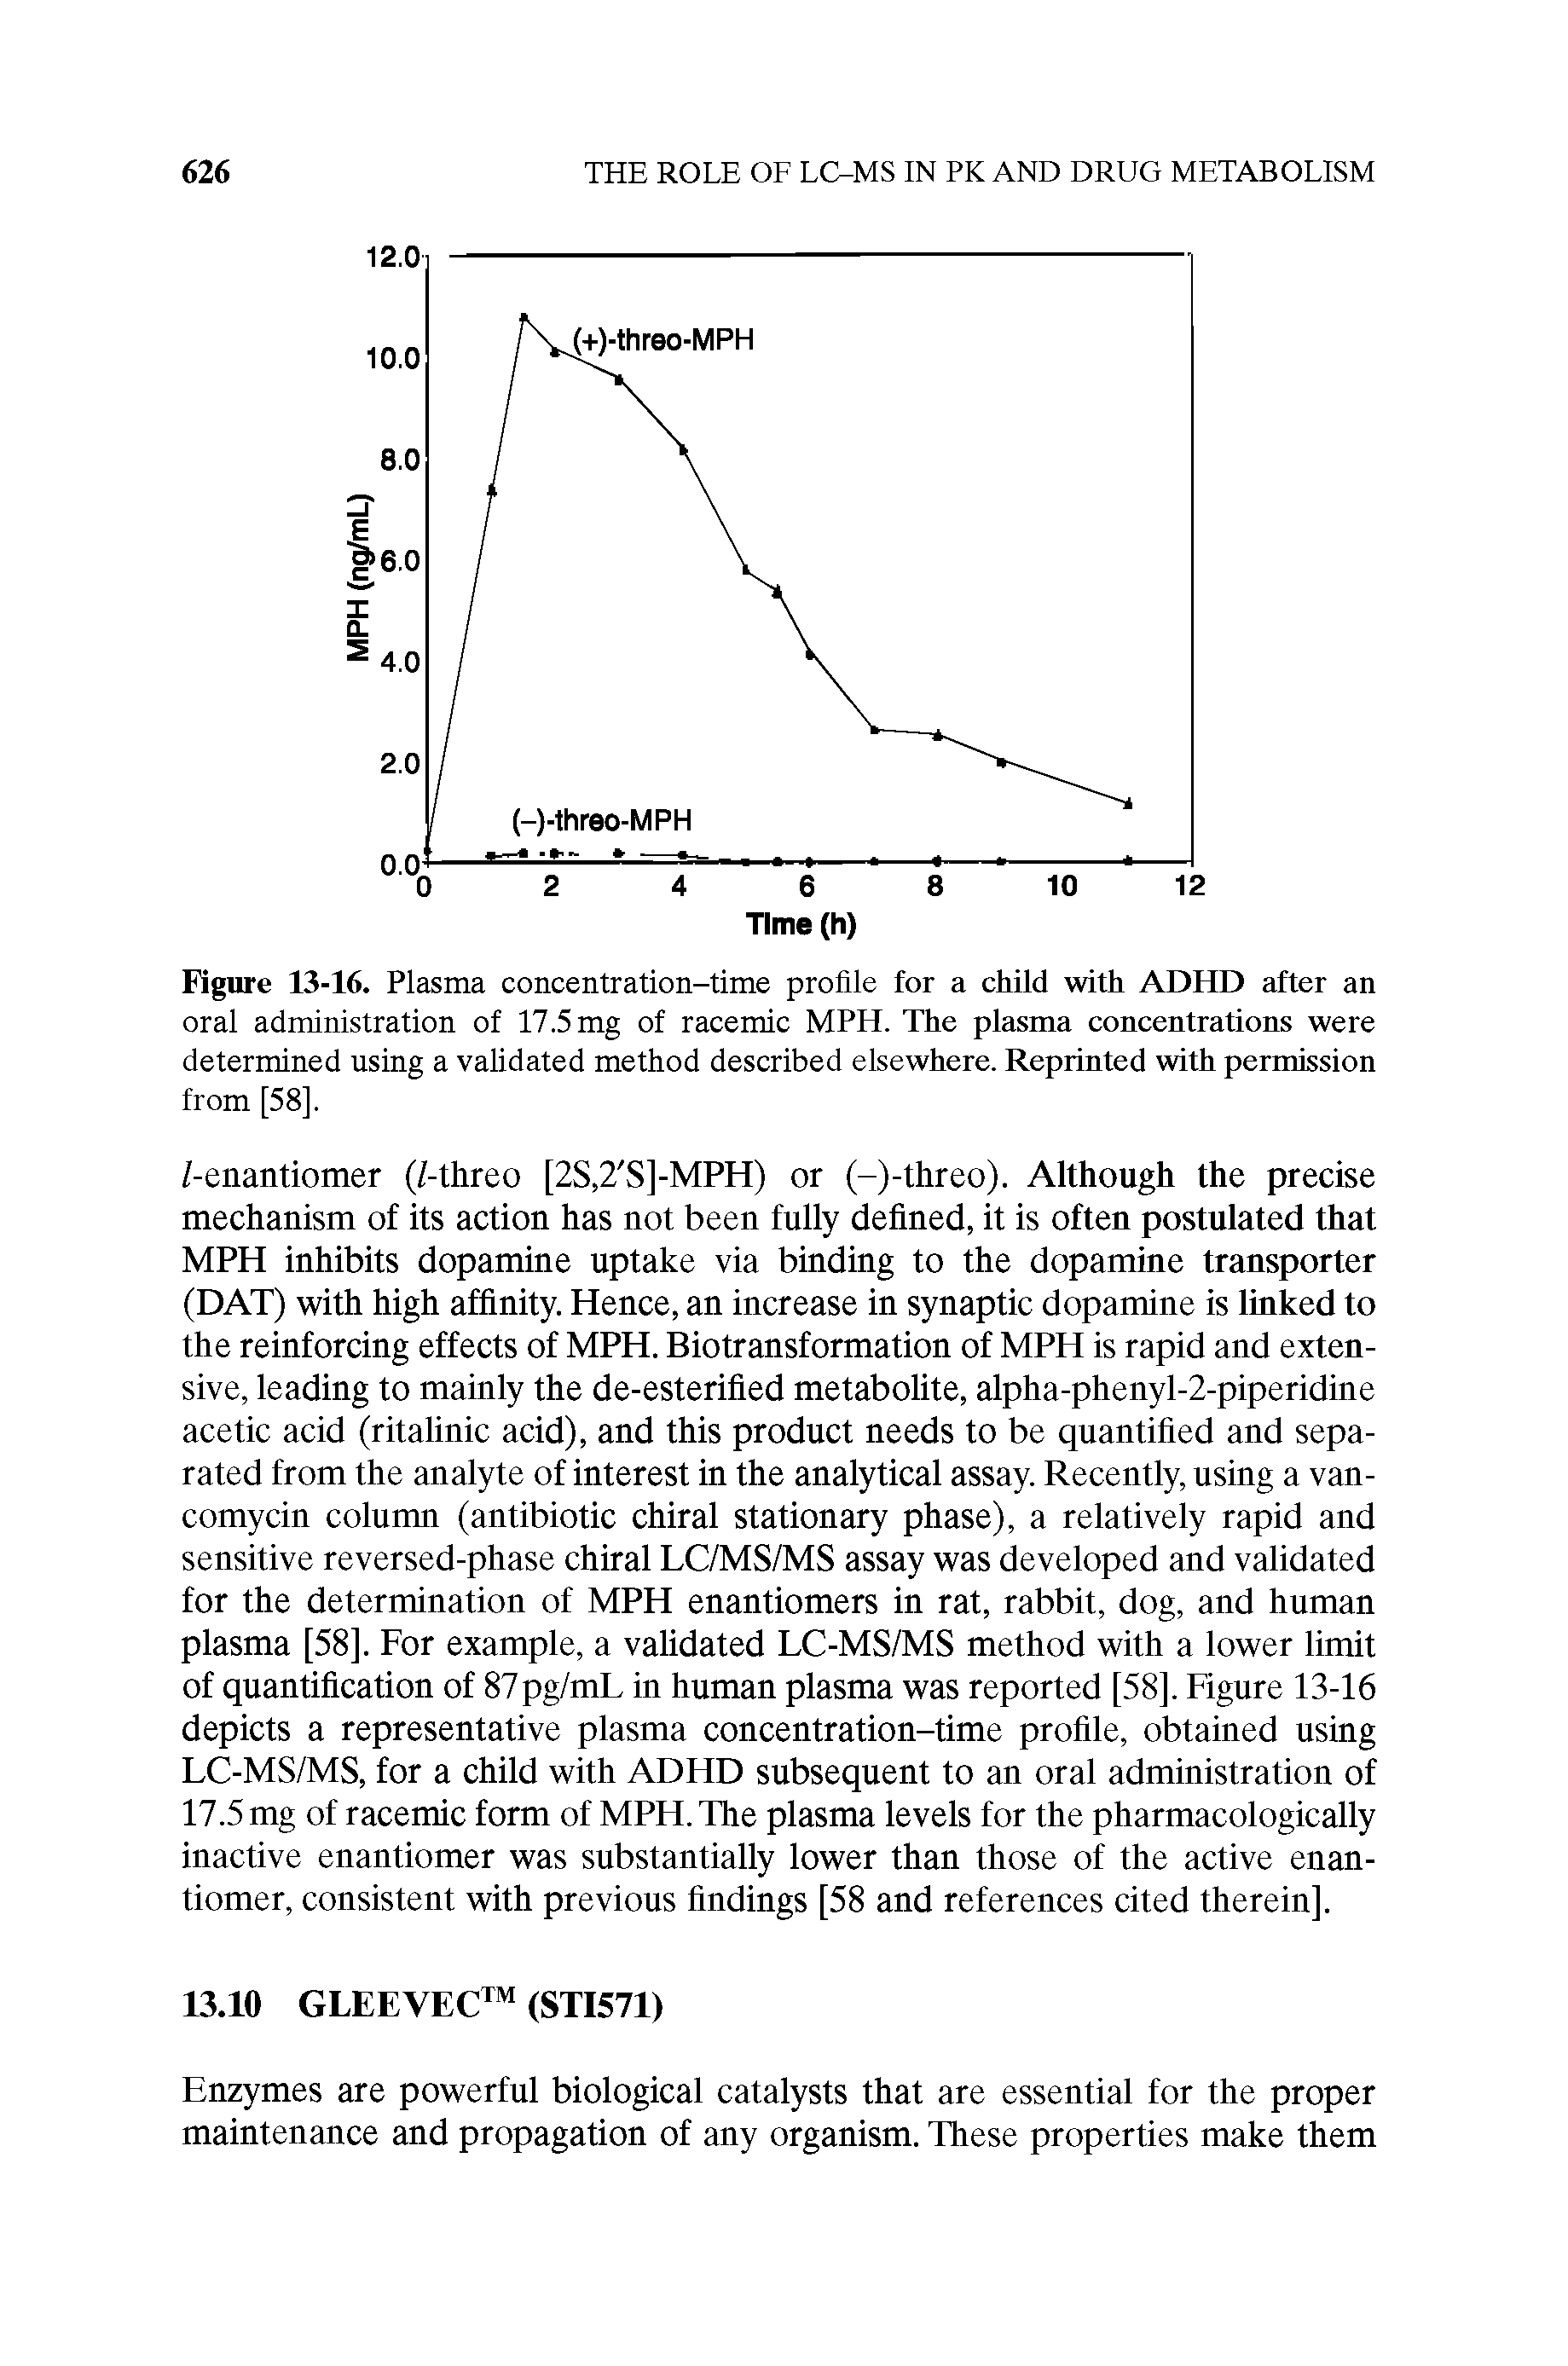 Figure 13-16. Plasma concentration-time profile for a child with ADHD after an oral administration of 17.5 mg of racemic MPH. The plasma concentrations were determined using a validated method described elsewhere. Reprinted with permission from [58].